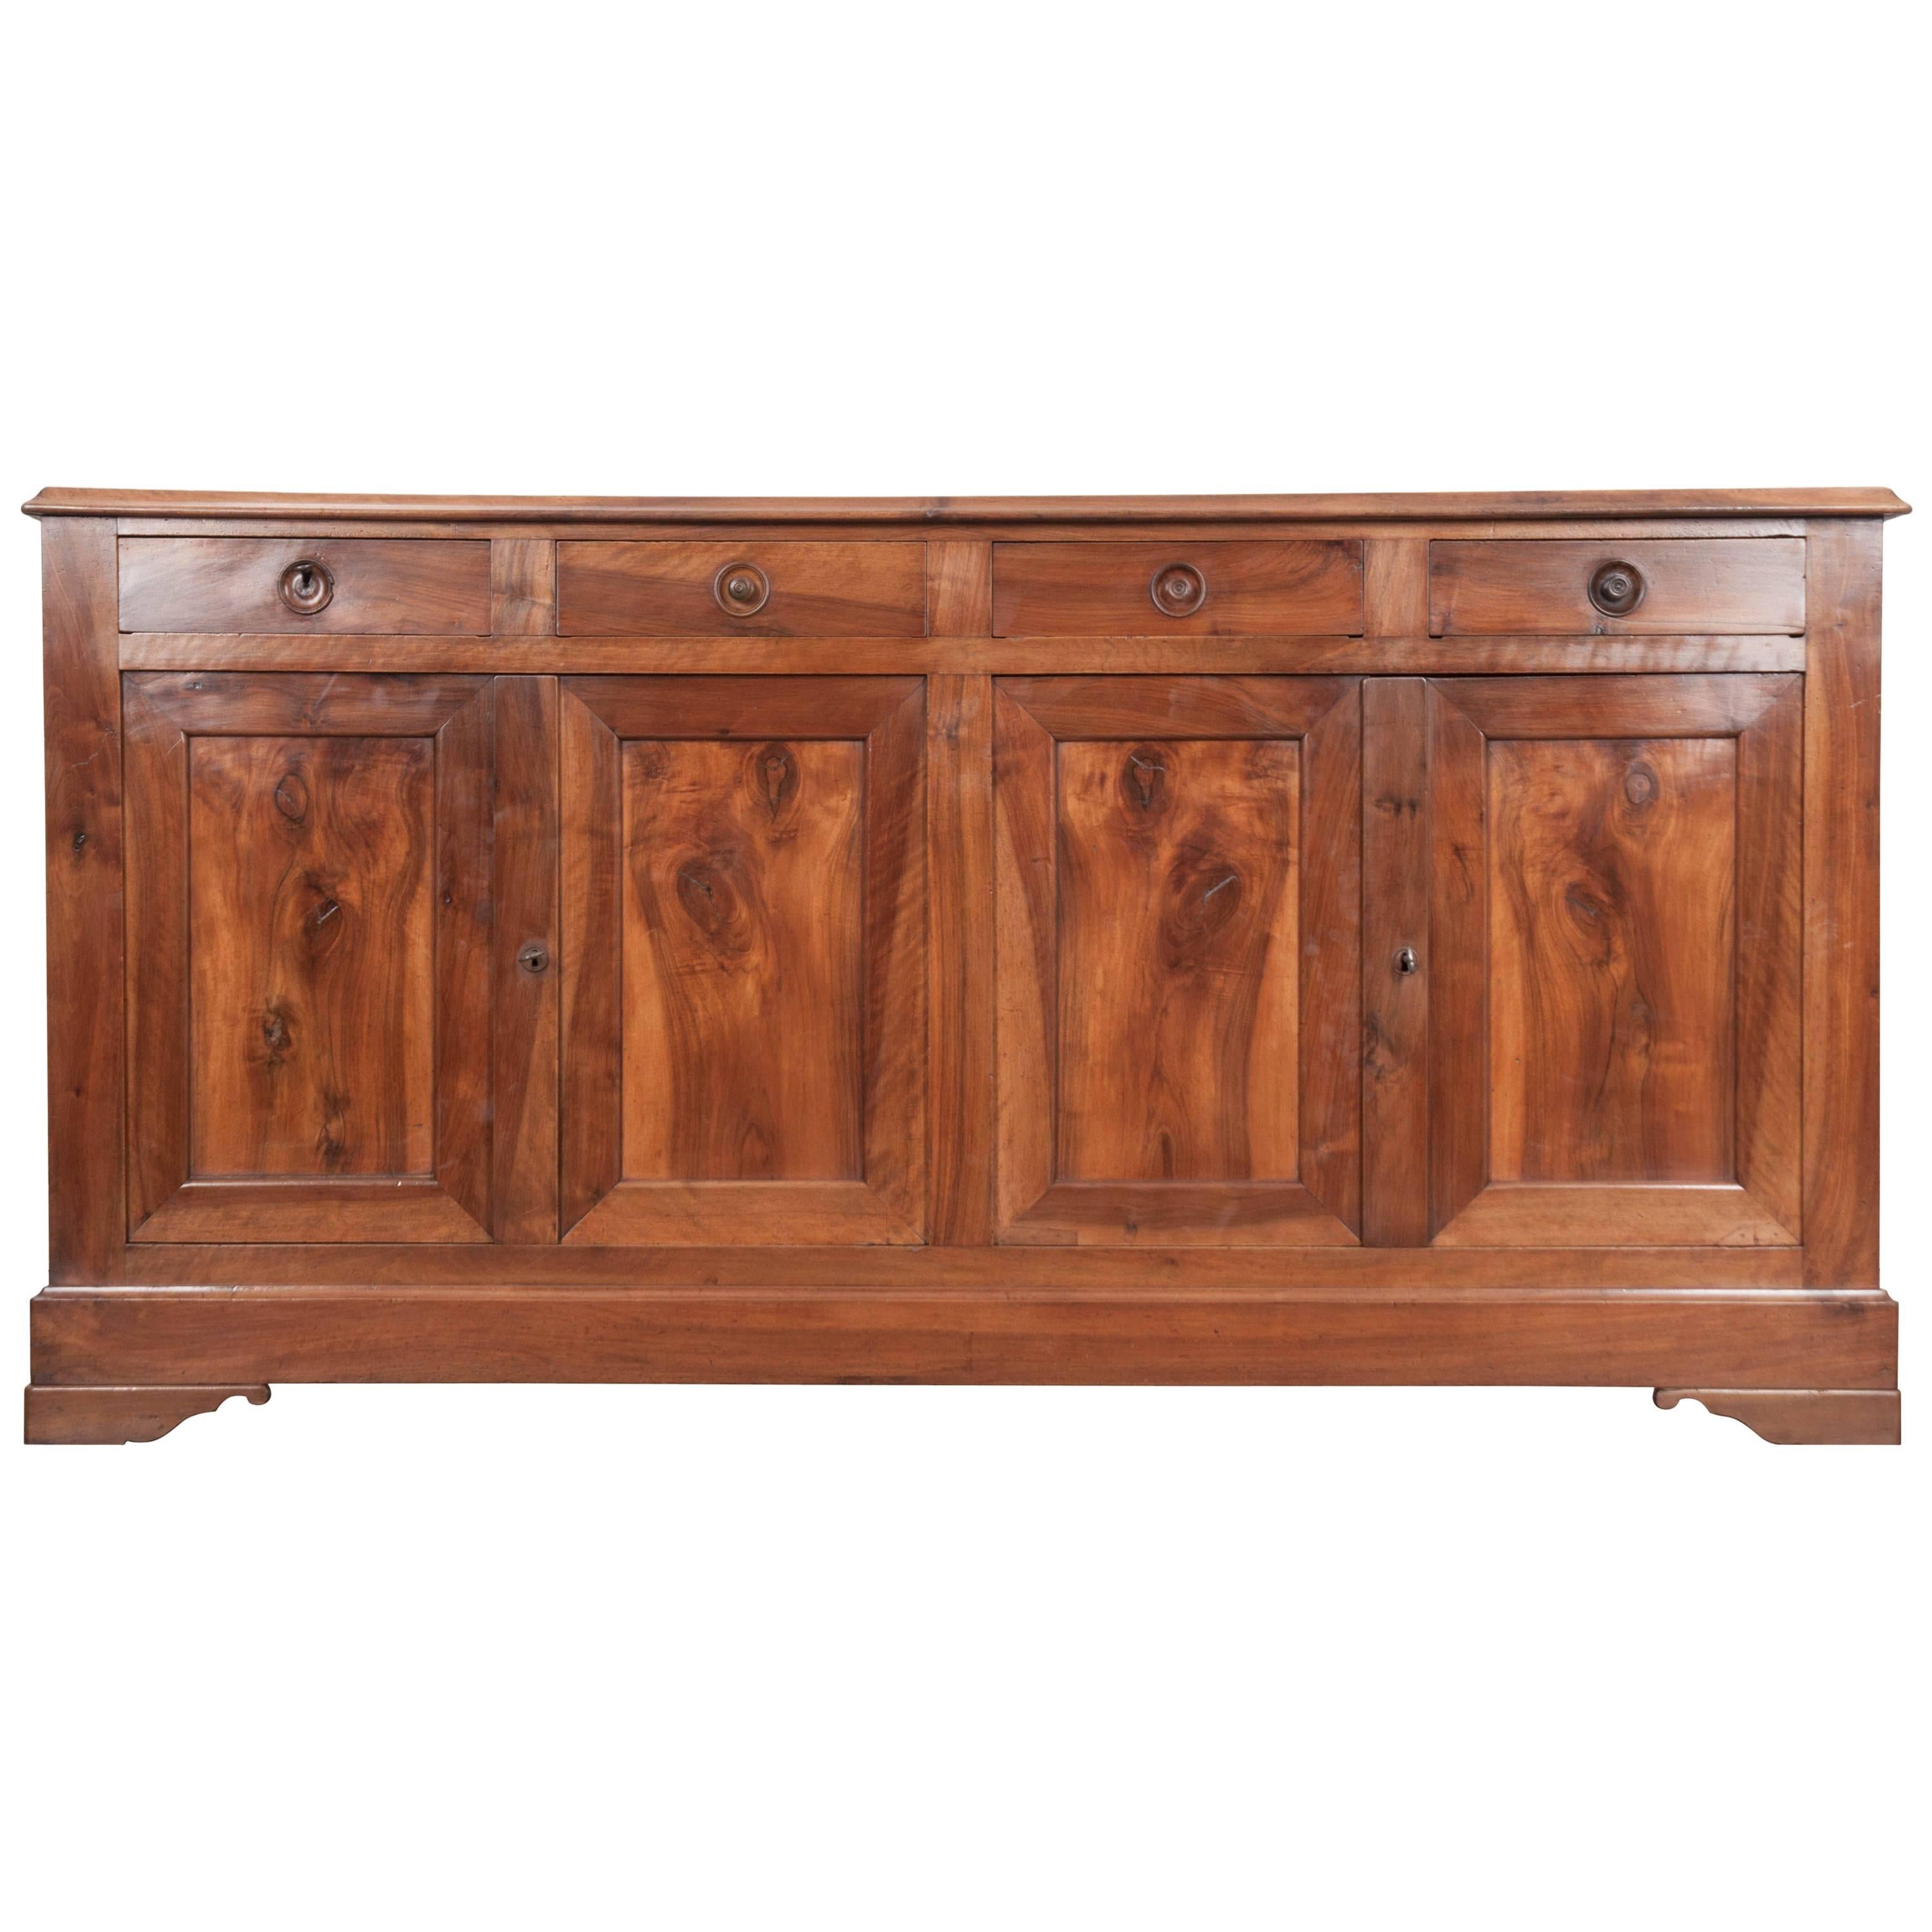 French 19th Century Walnut Louis Philippe Enfilade